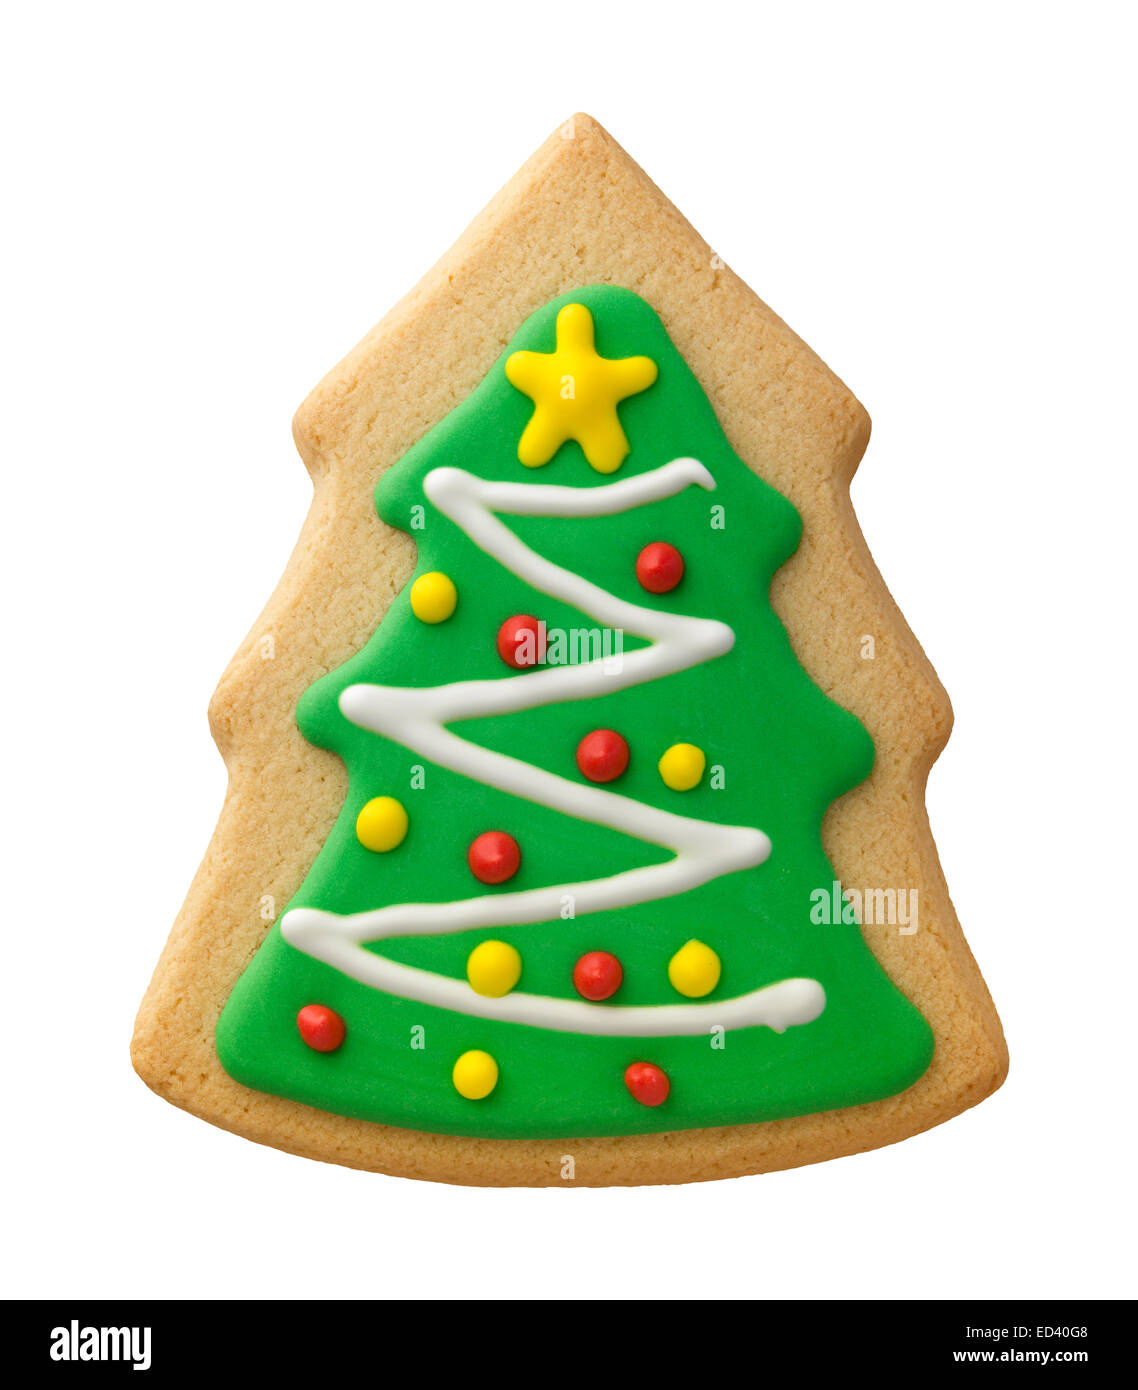 Gingerbread Christmas Tree with Decorations Stock Photo